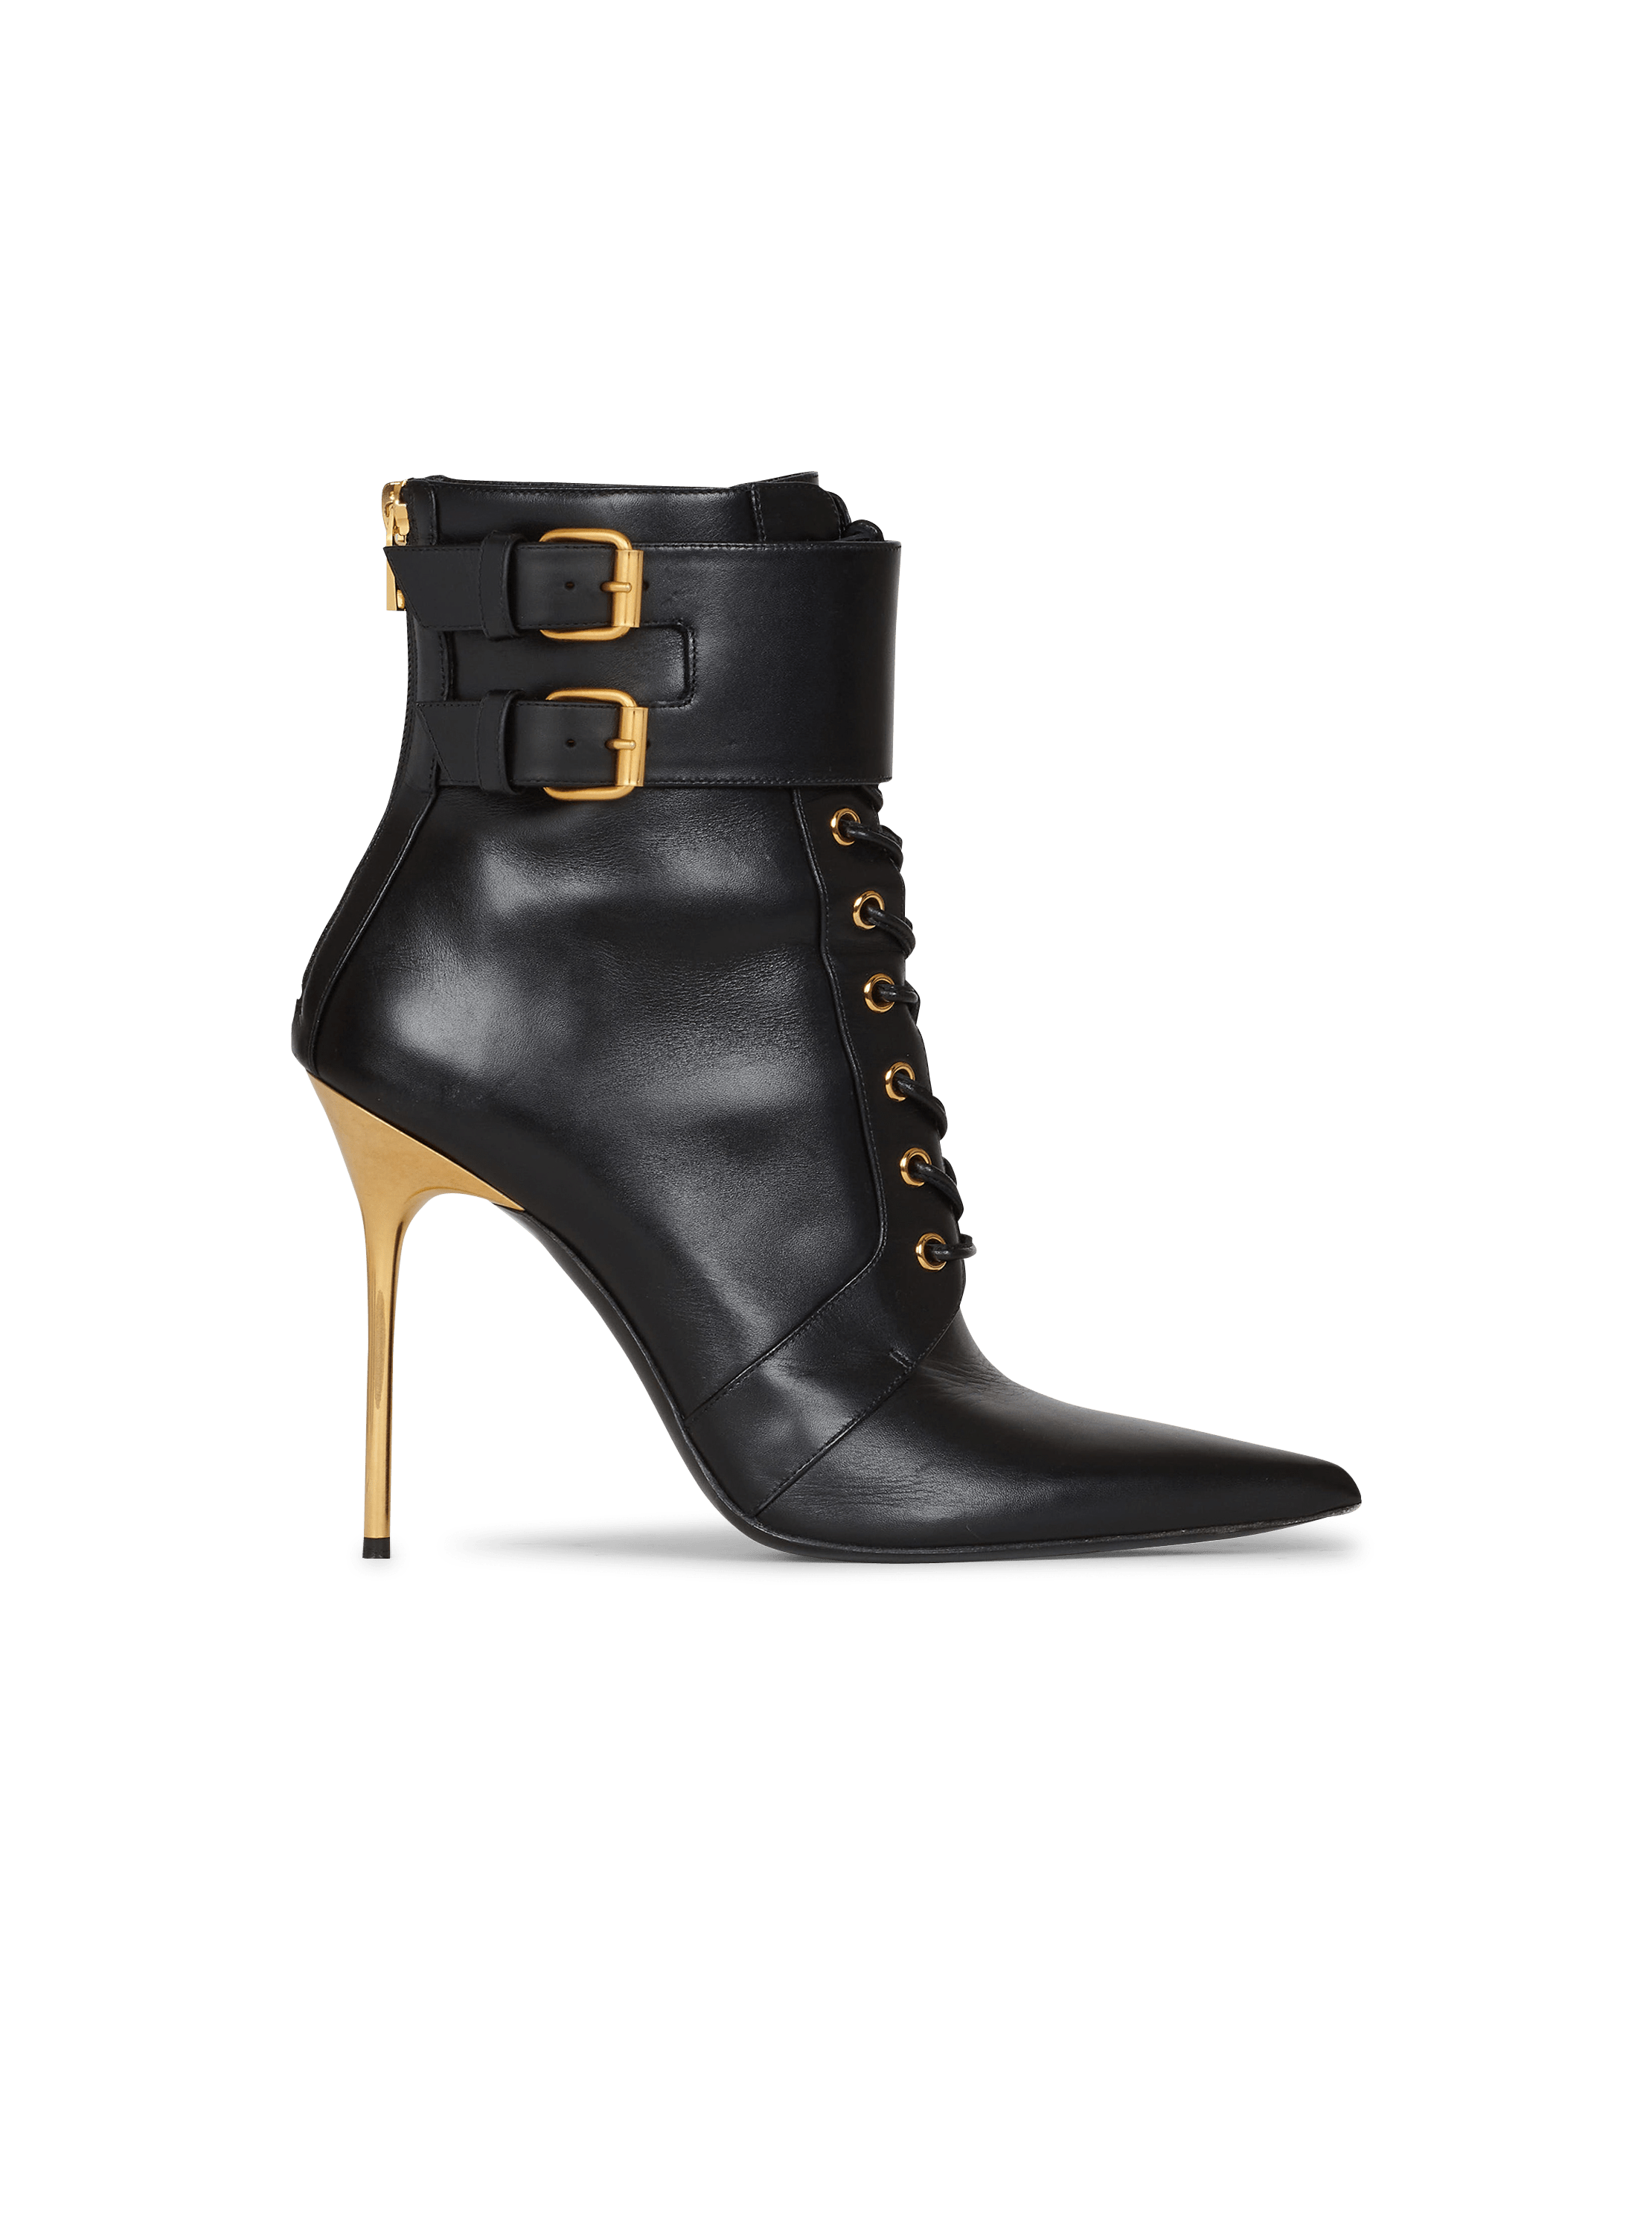 Uria leather ankle boots, black, hi-res